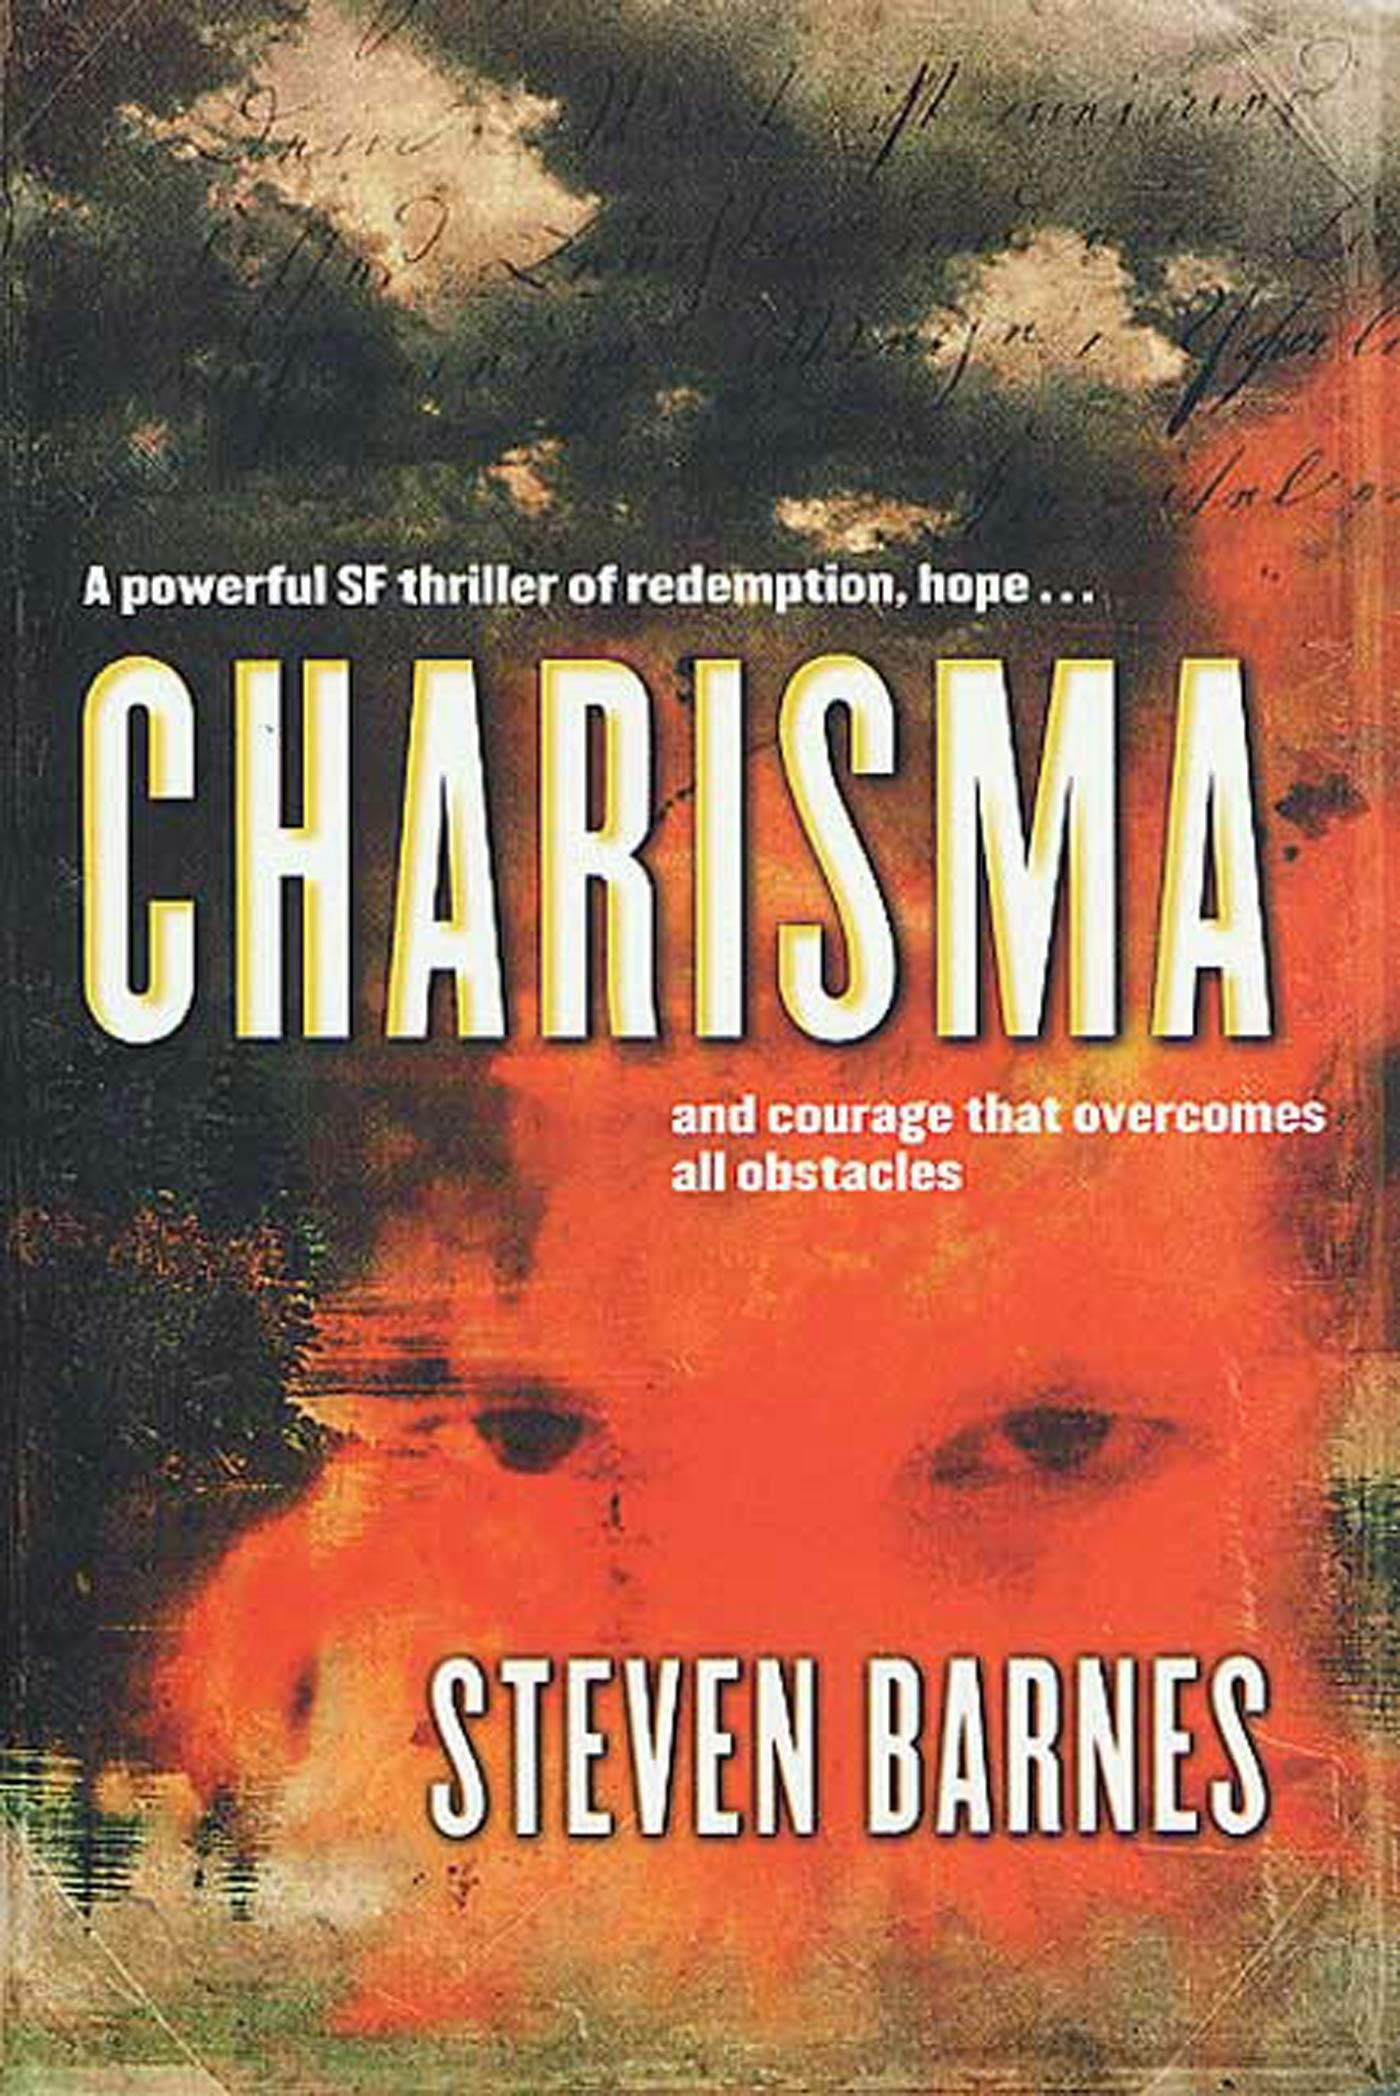 Cover for the book titled as: Charisma